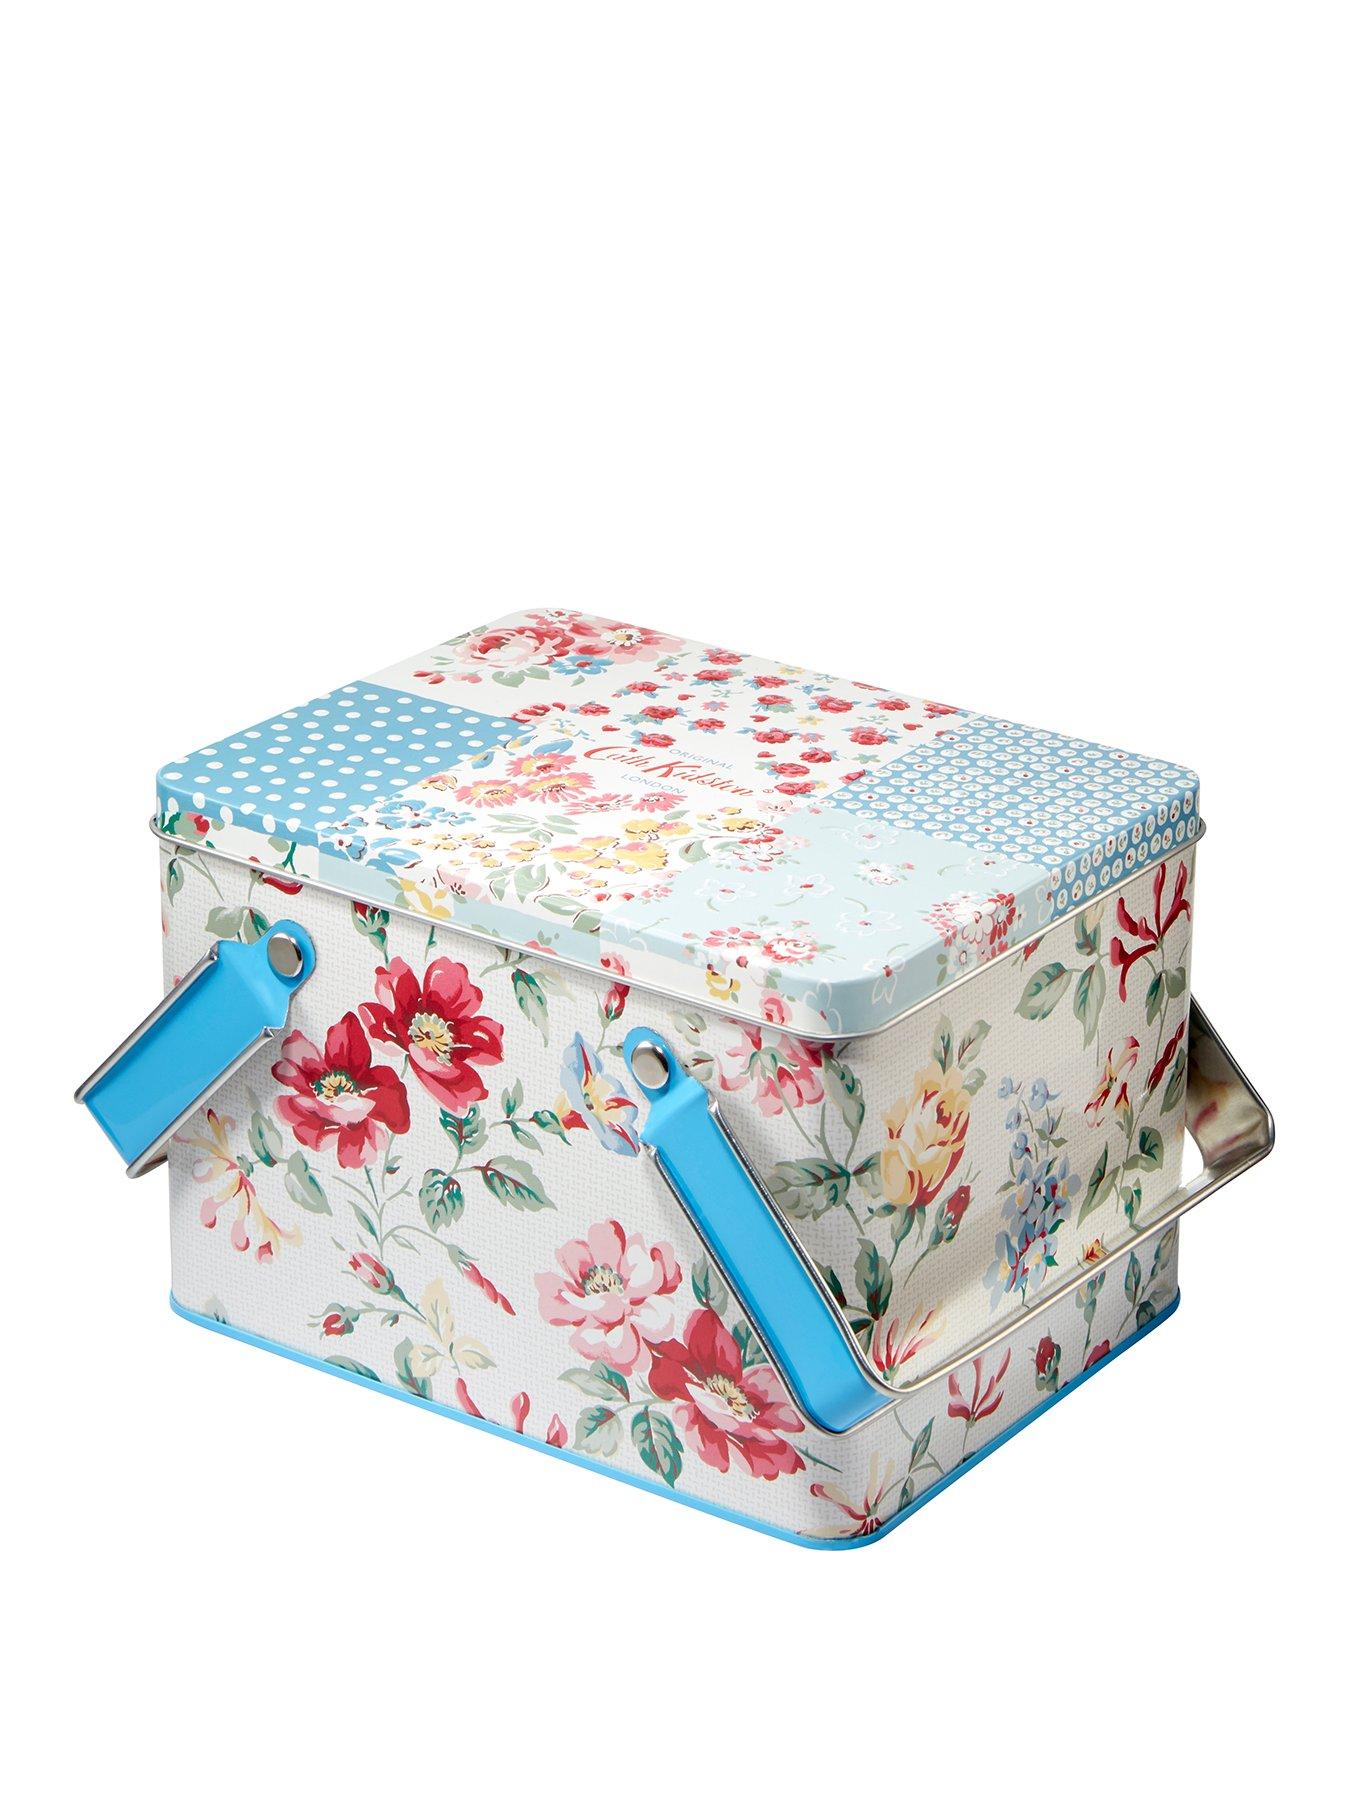 Cath Kidston | Accessories, Gifts 